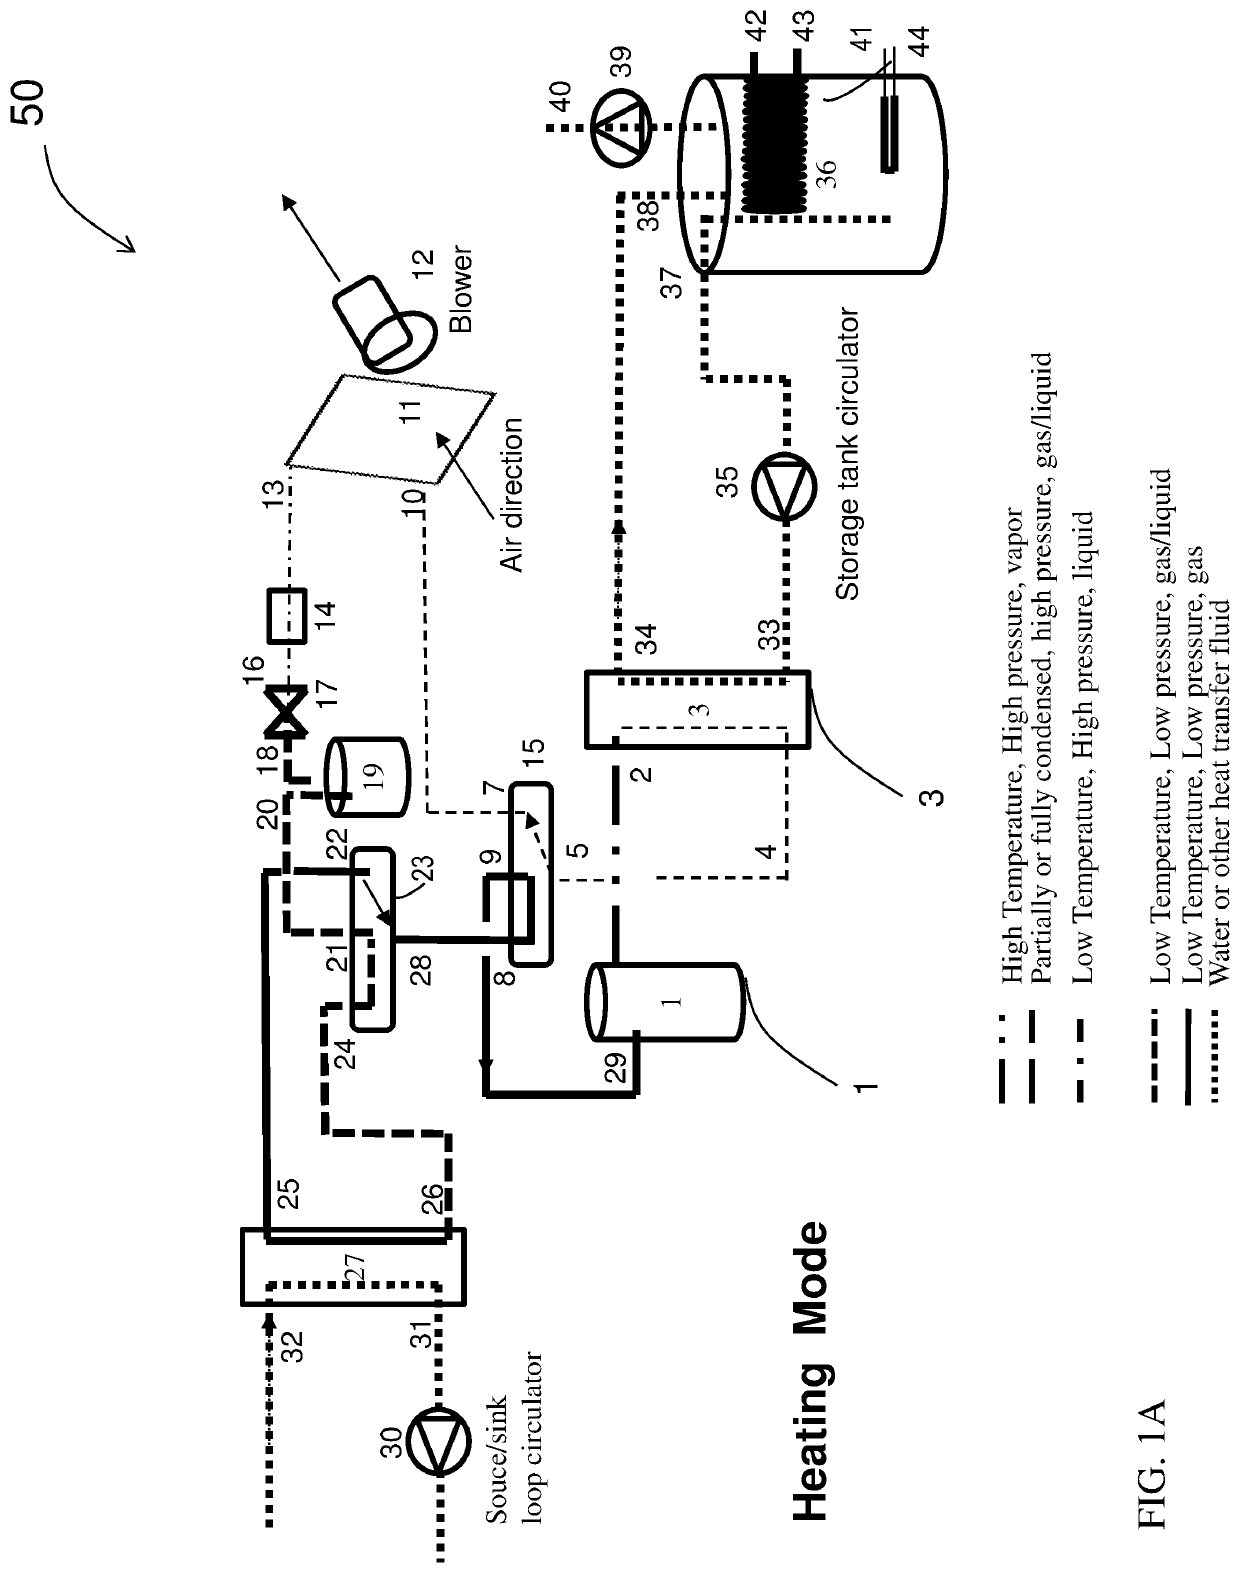 Double Hybrid Heat Pumps and Systems and Methods of Use and Operations